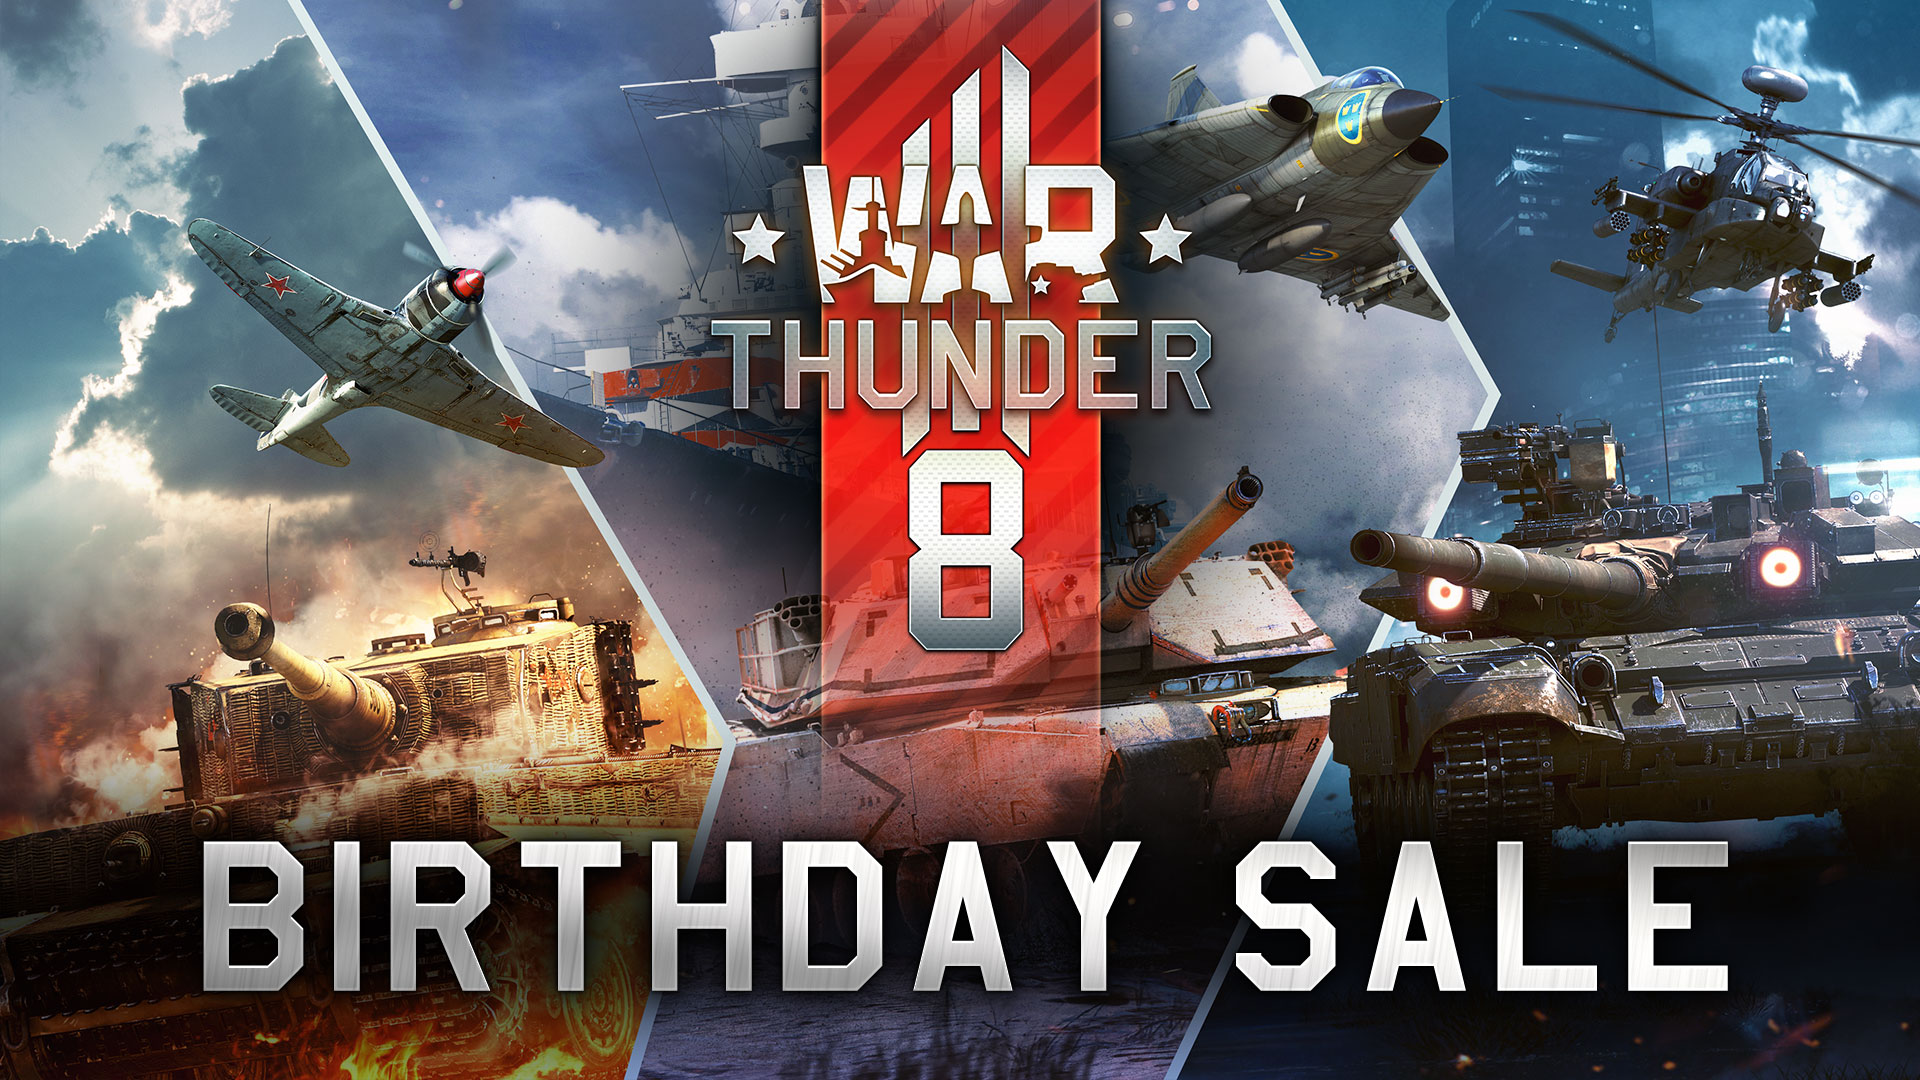 War Thunder Until The 9th Of November We Re Having A Massive Birthday Sale For Warthunder In The Gaijin Store Check The Website For The Discounted Bundles And Packs At 30 And 50 More On T Co Pav4jyg0xm T Co